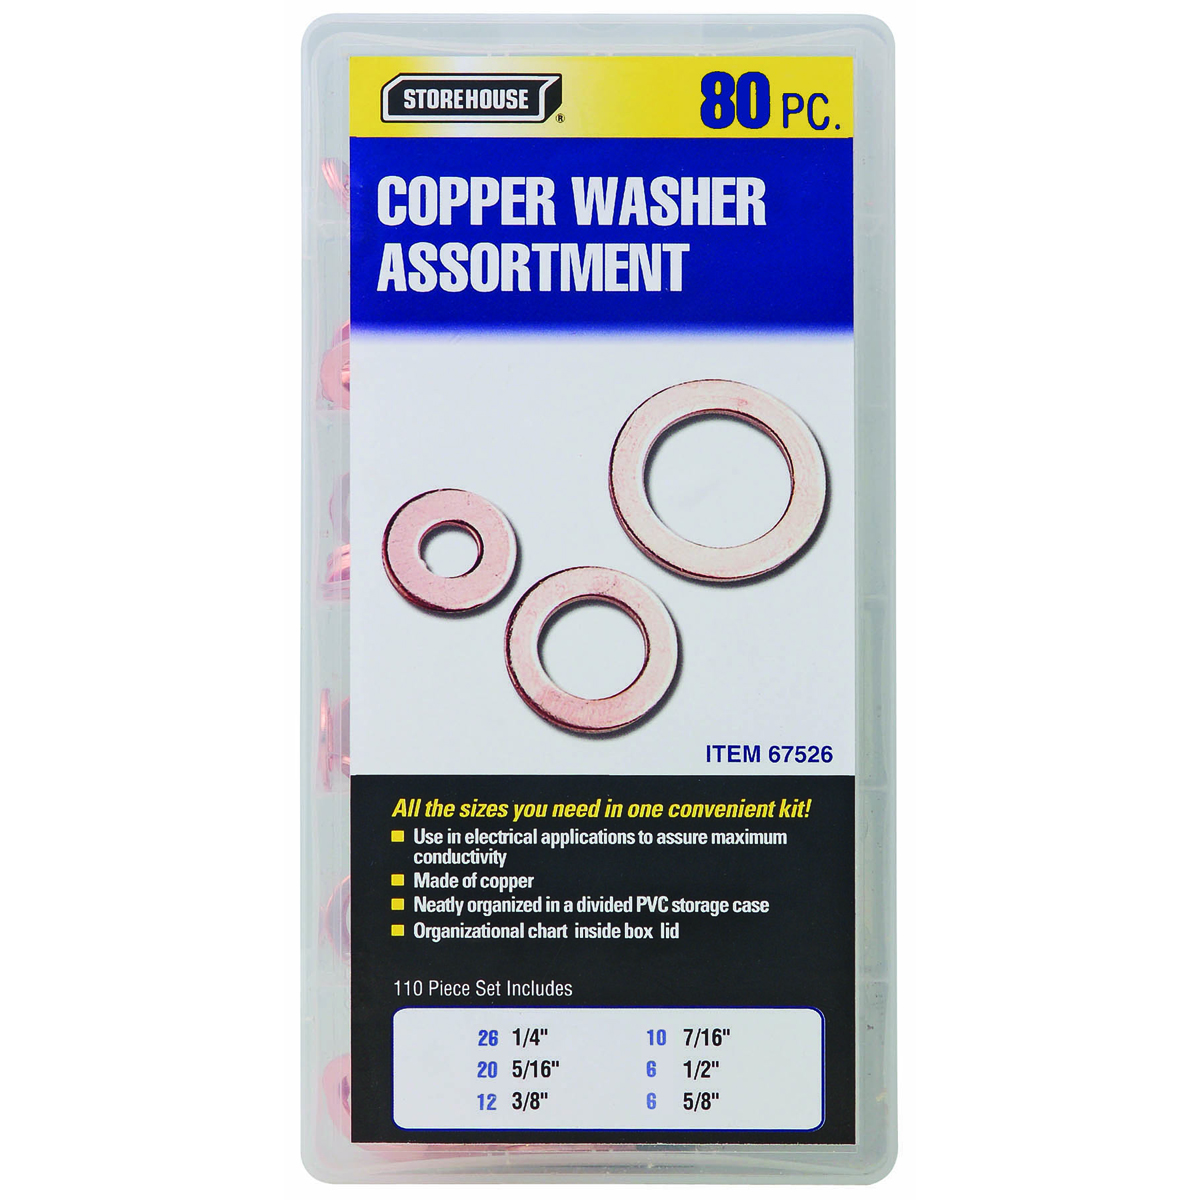 STOREHOUSE Copper Washer Assortment 80 Pc. - Item 67526